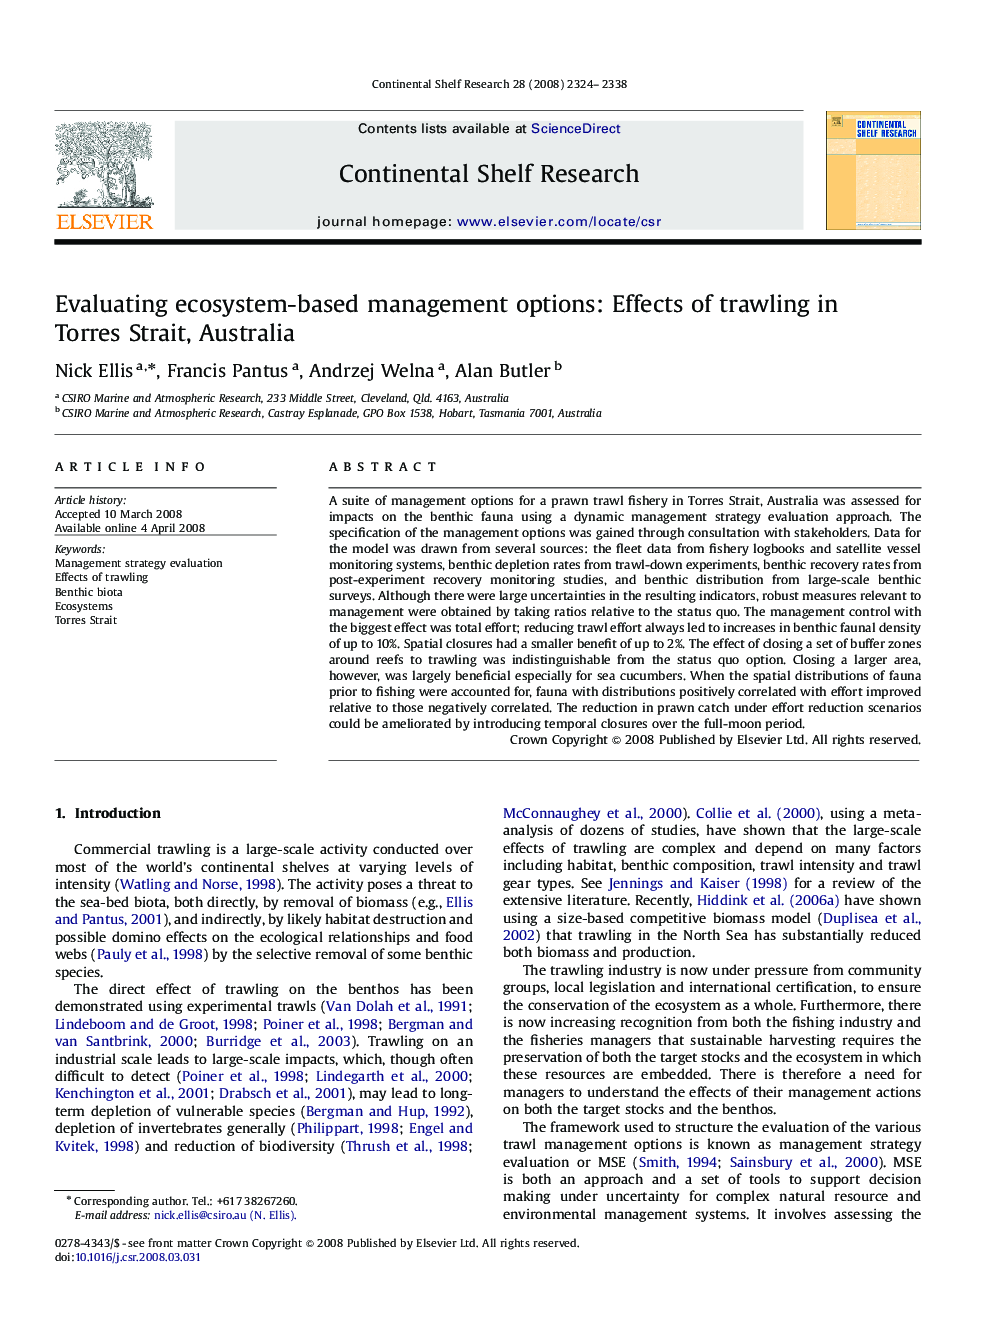 Evaluating ecosystem-based management options: Effects of trawling in Torres Strait, Australia